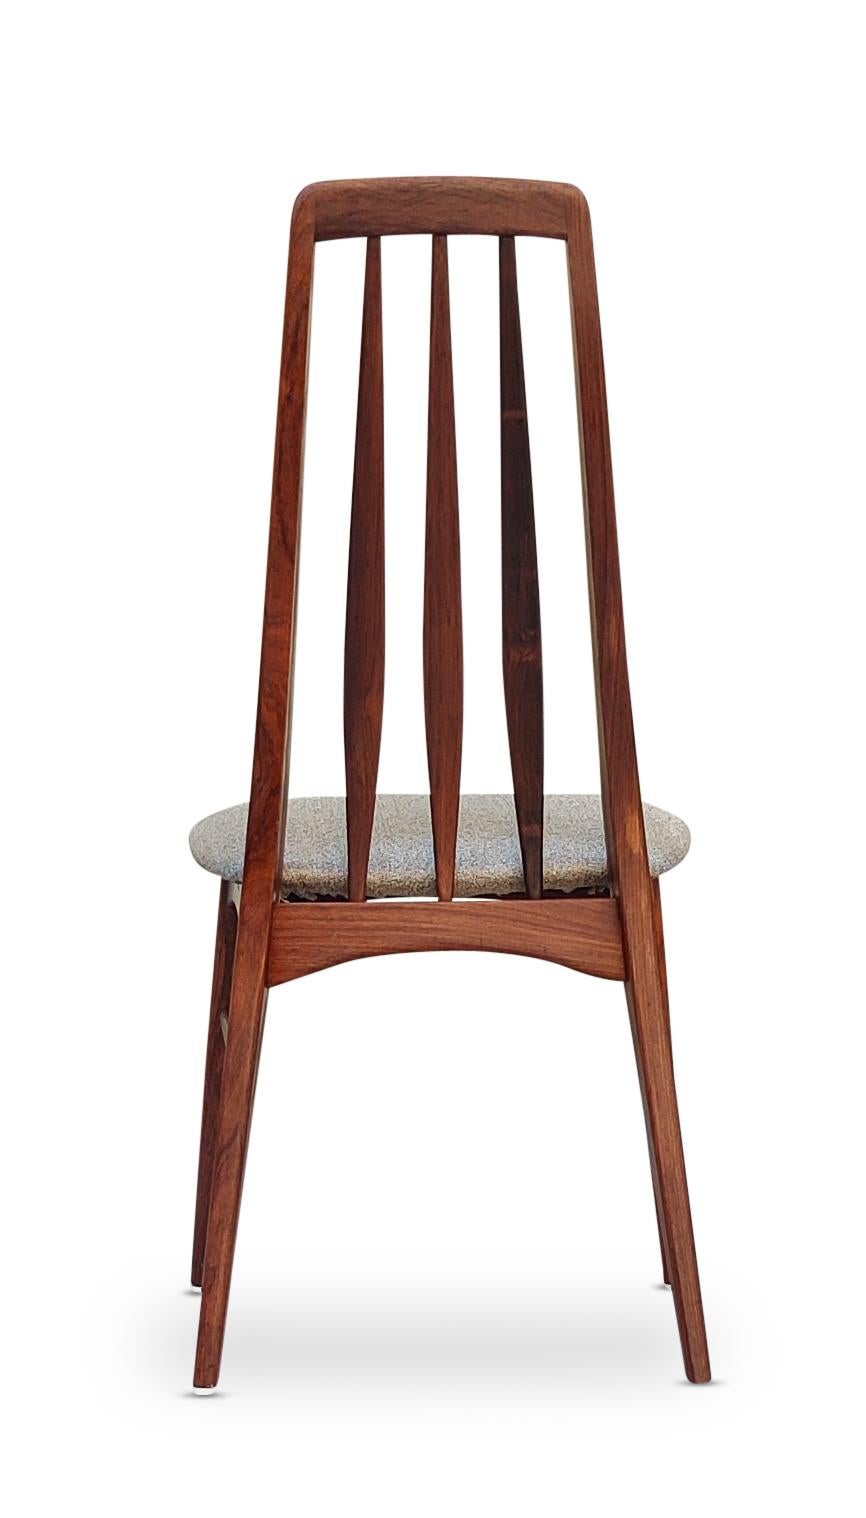 Upholstery Niels Koefoed Eva Mid-Century Danish Rosewood Dining Chairs, Set of 6 For Sale